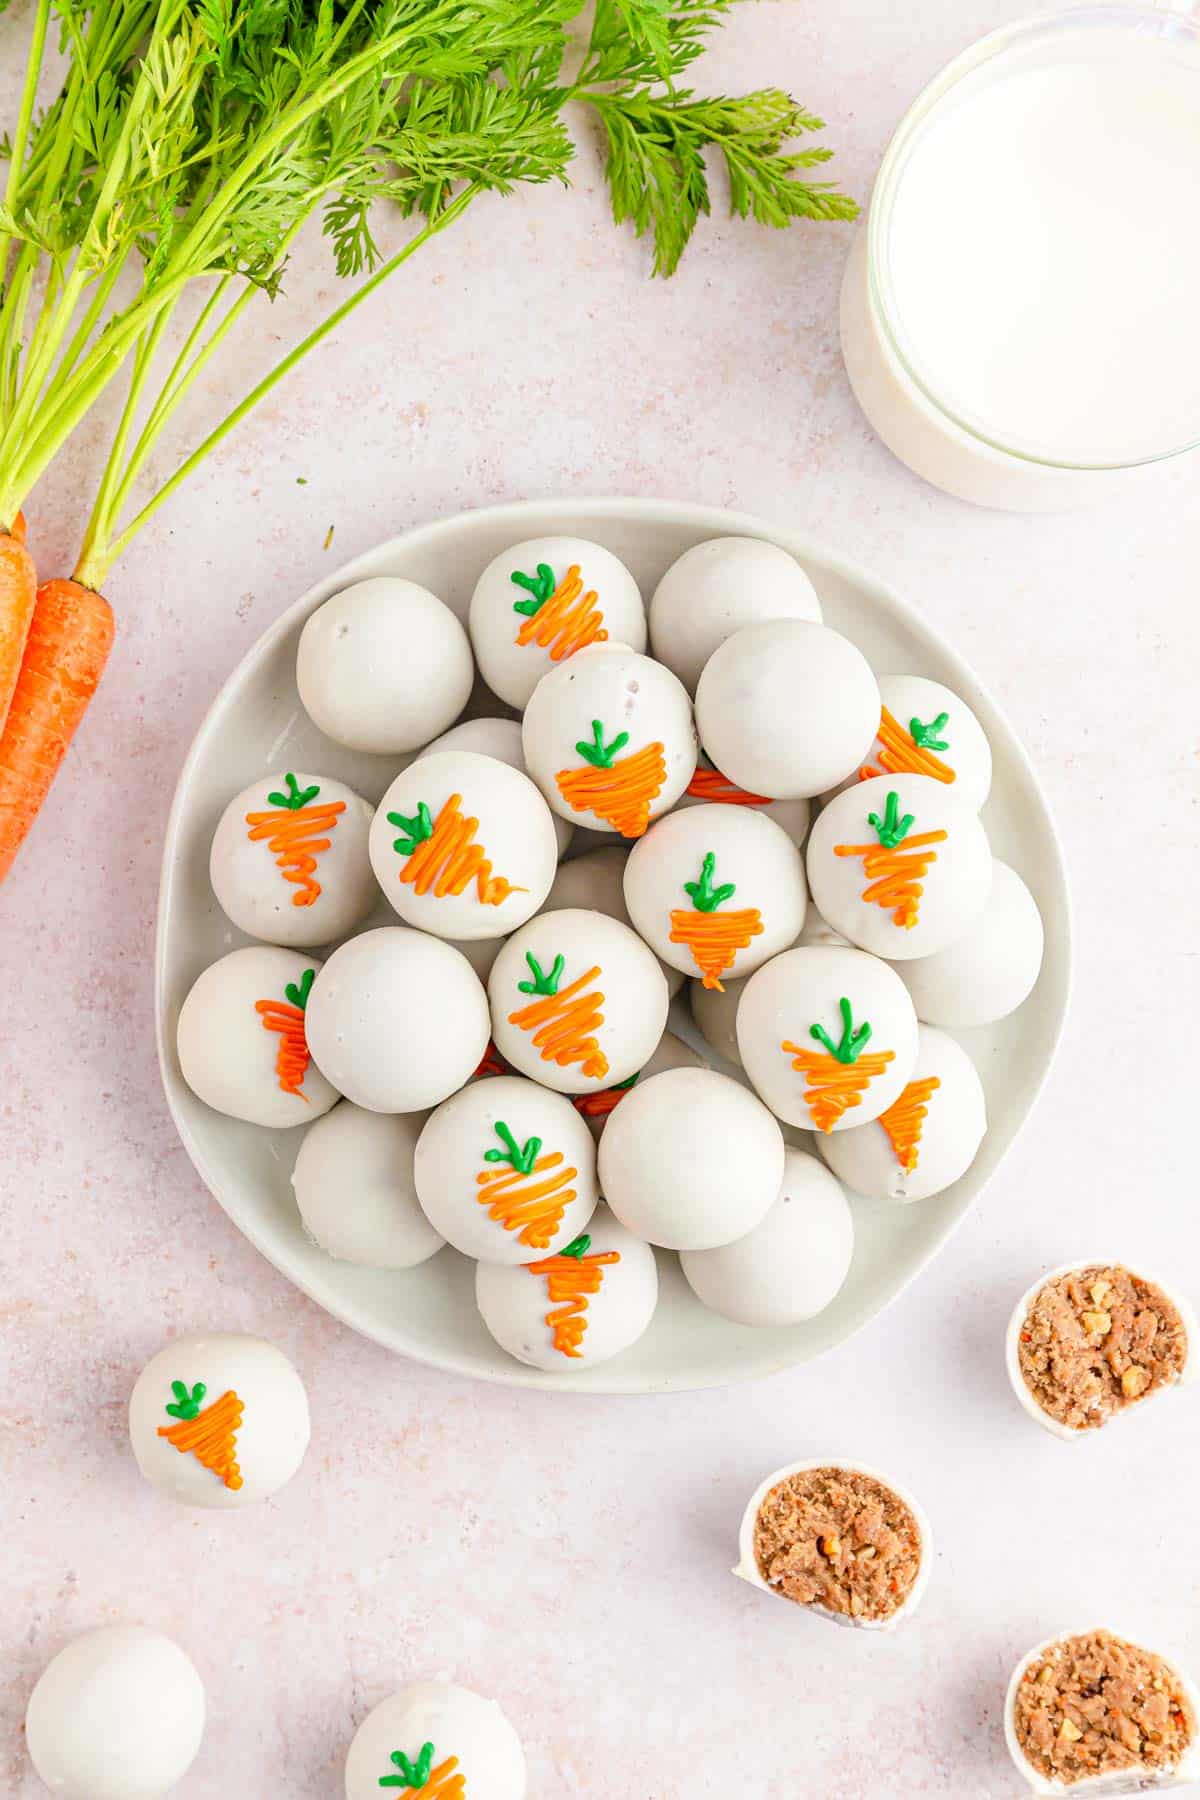 A white plate filled with carrot cake balls decorated with colored chocolate to look like carrots.